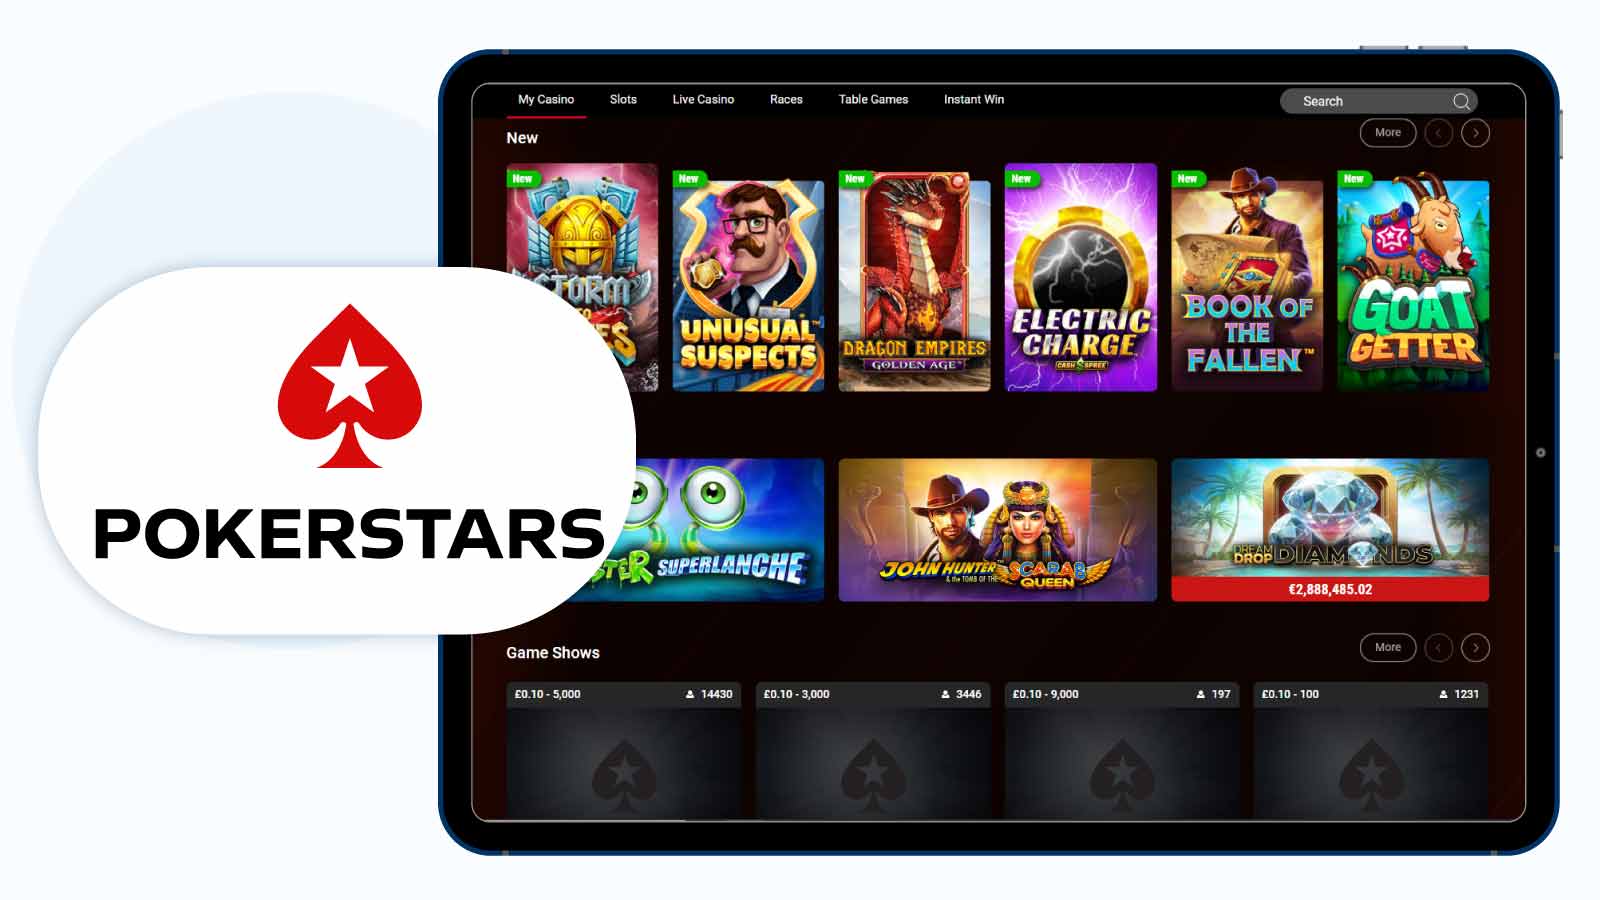 PokerStars Casino – Outstanding Bank Transfer Site with Attractive Low Wagering Incentive